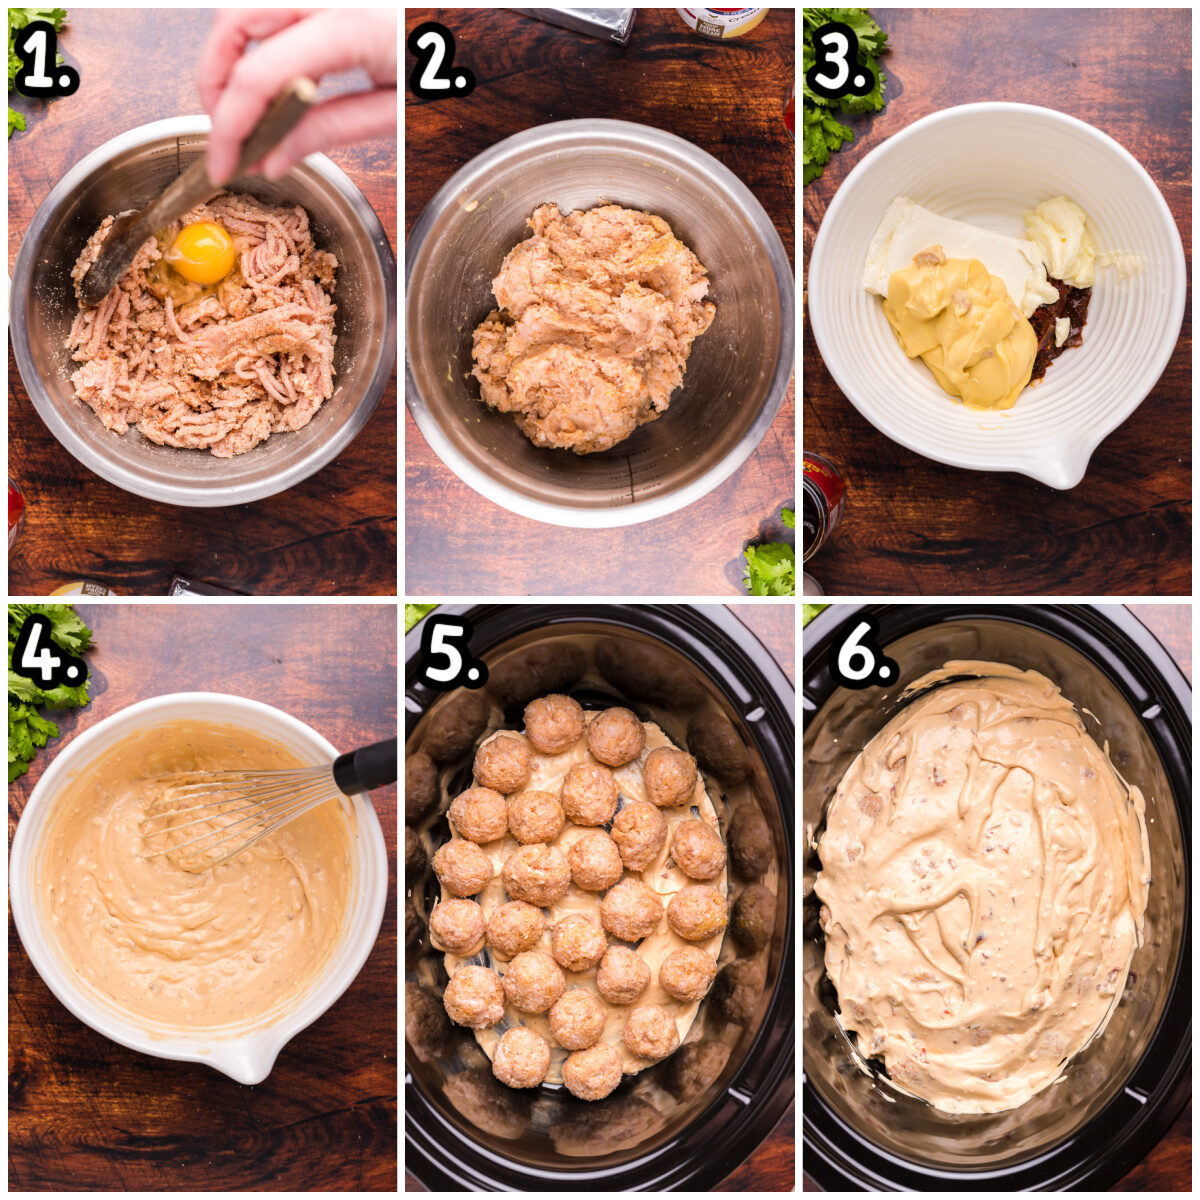 6 images about how to form meatballs and make chipotle sauce.